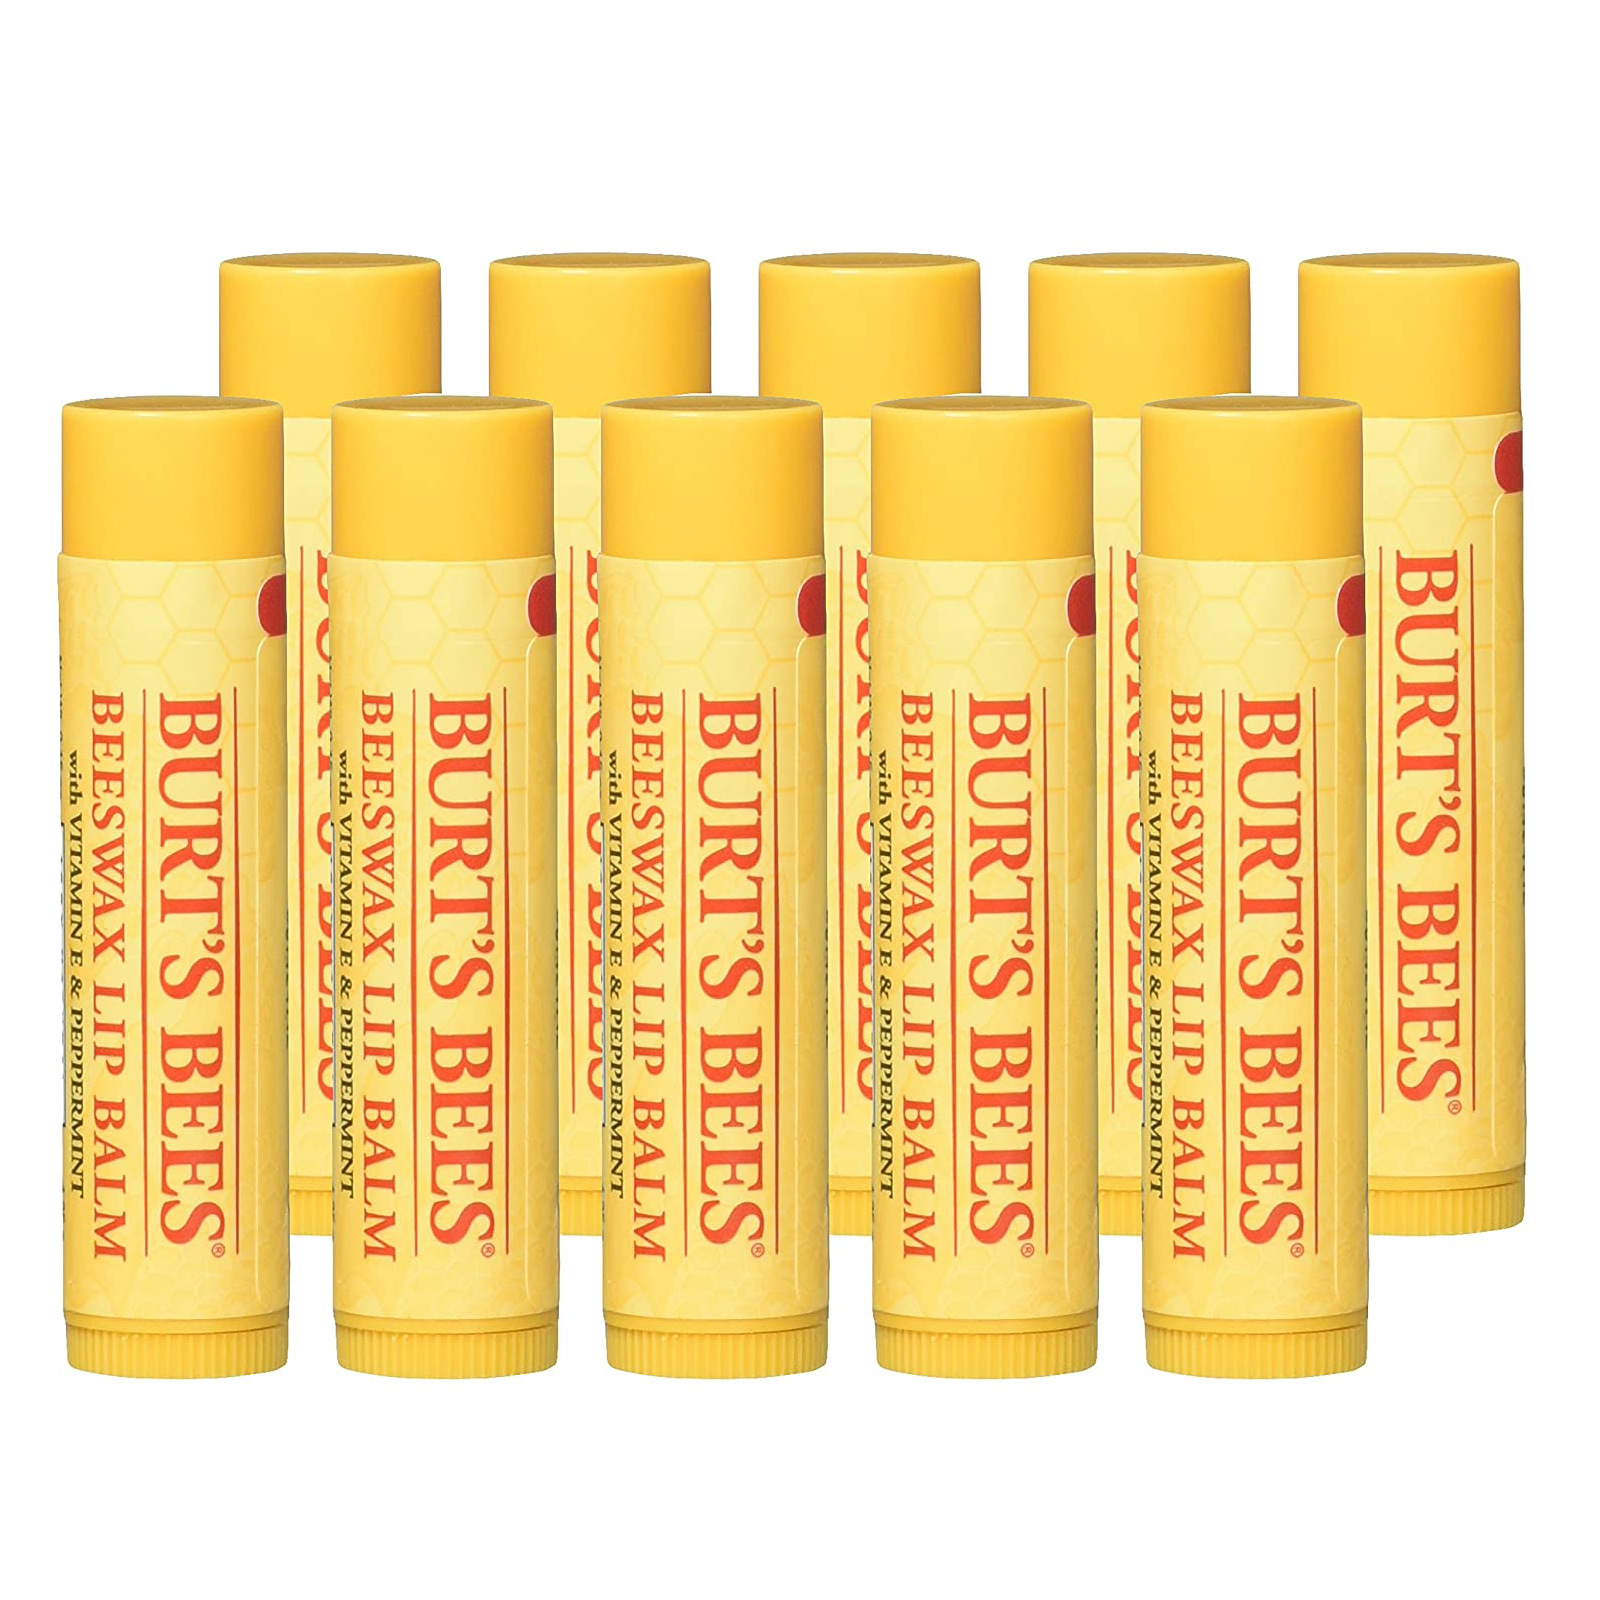 WHOLESALE BURT'S BEES BEESWAX LIP BALM WITH VITAMIN E & PEPPERMINT 0.15 OZ (PACK OF 10) - 48 PIECE LOT